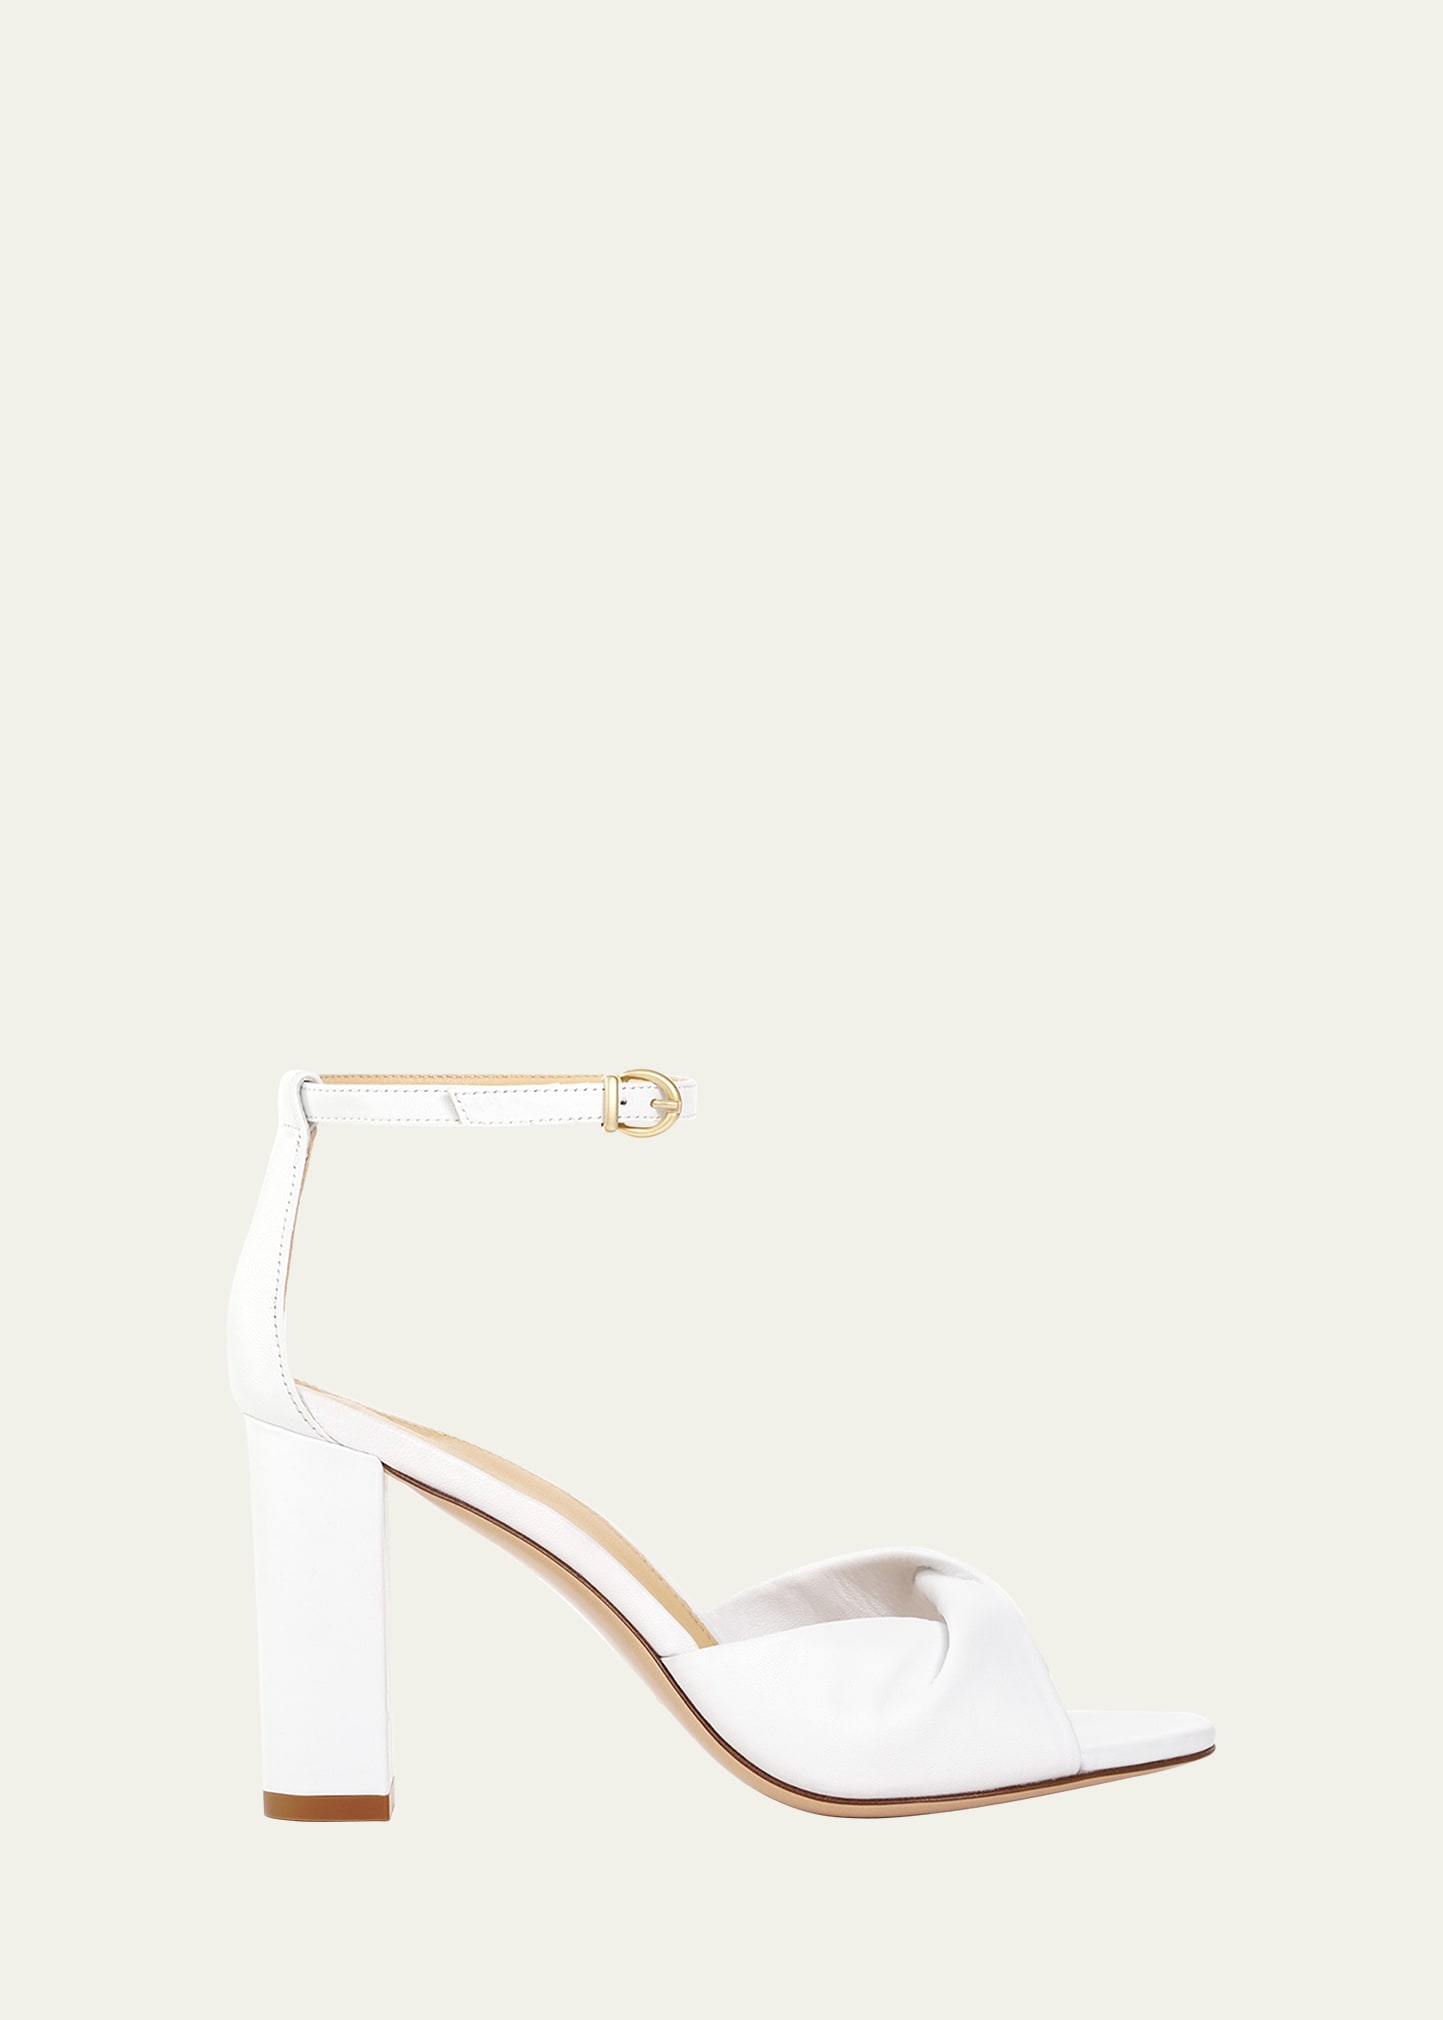 Marion Parke Carrie Twisted Napa Ankle-Strap Sandals